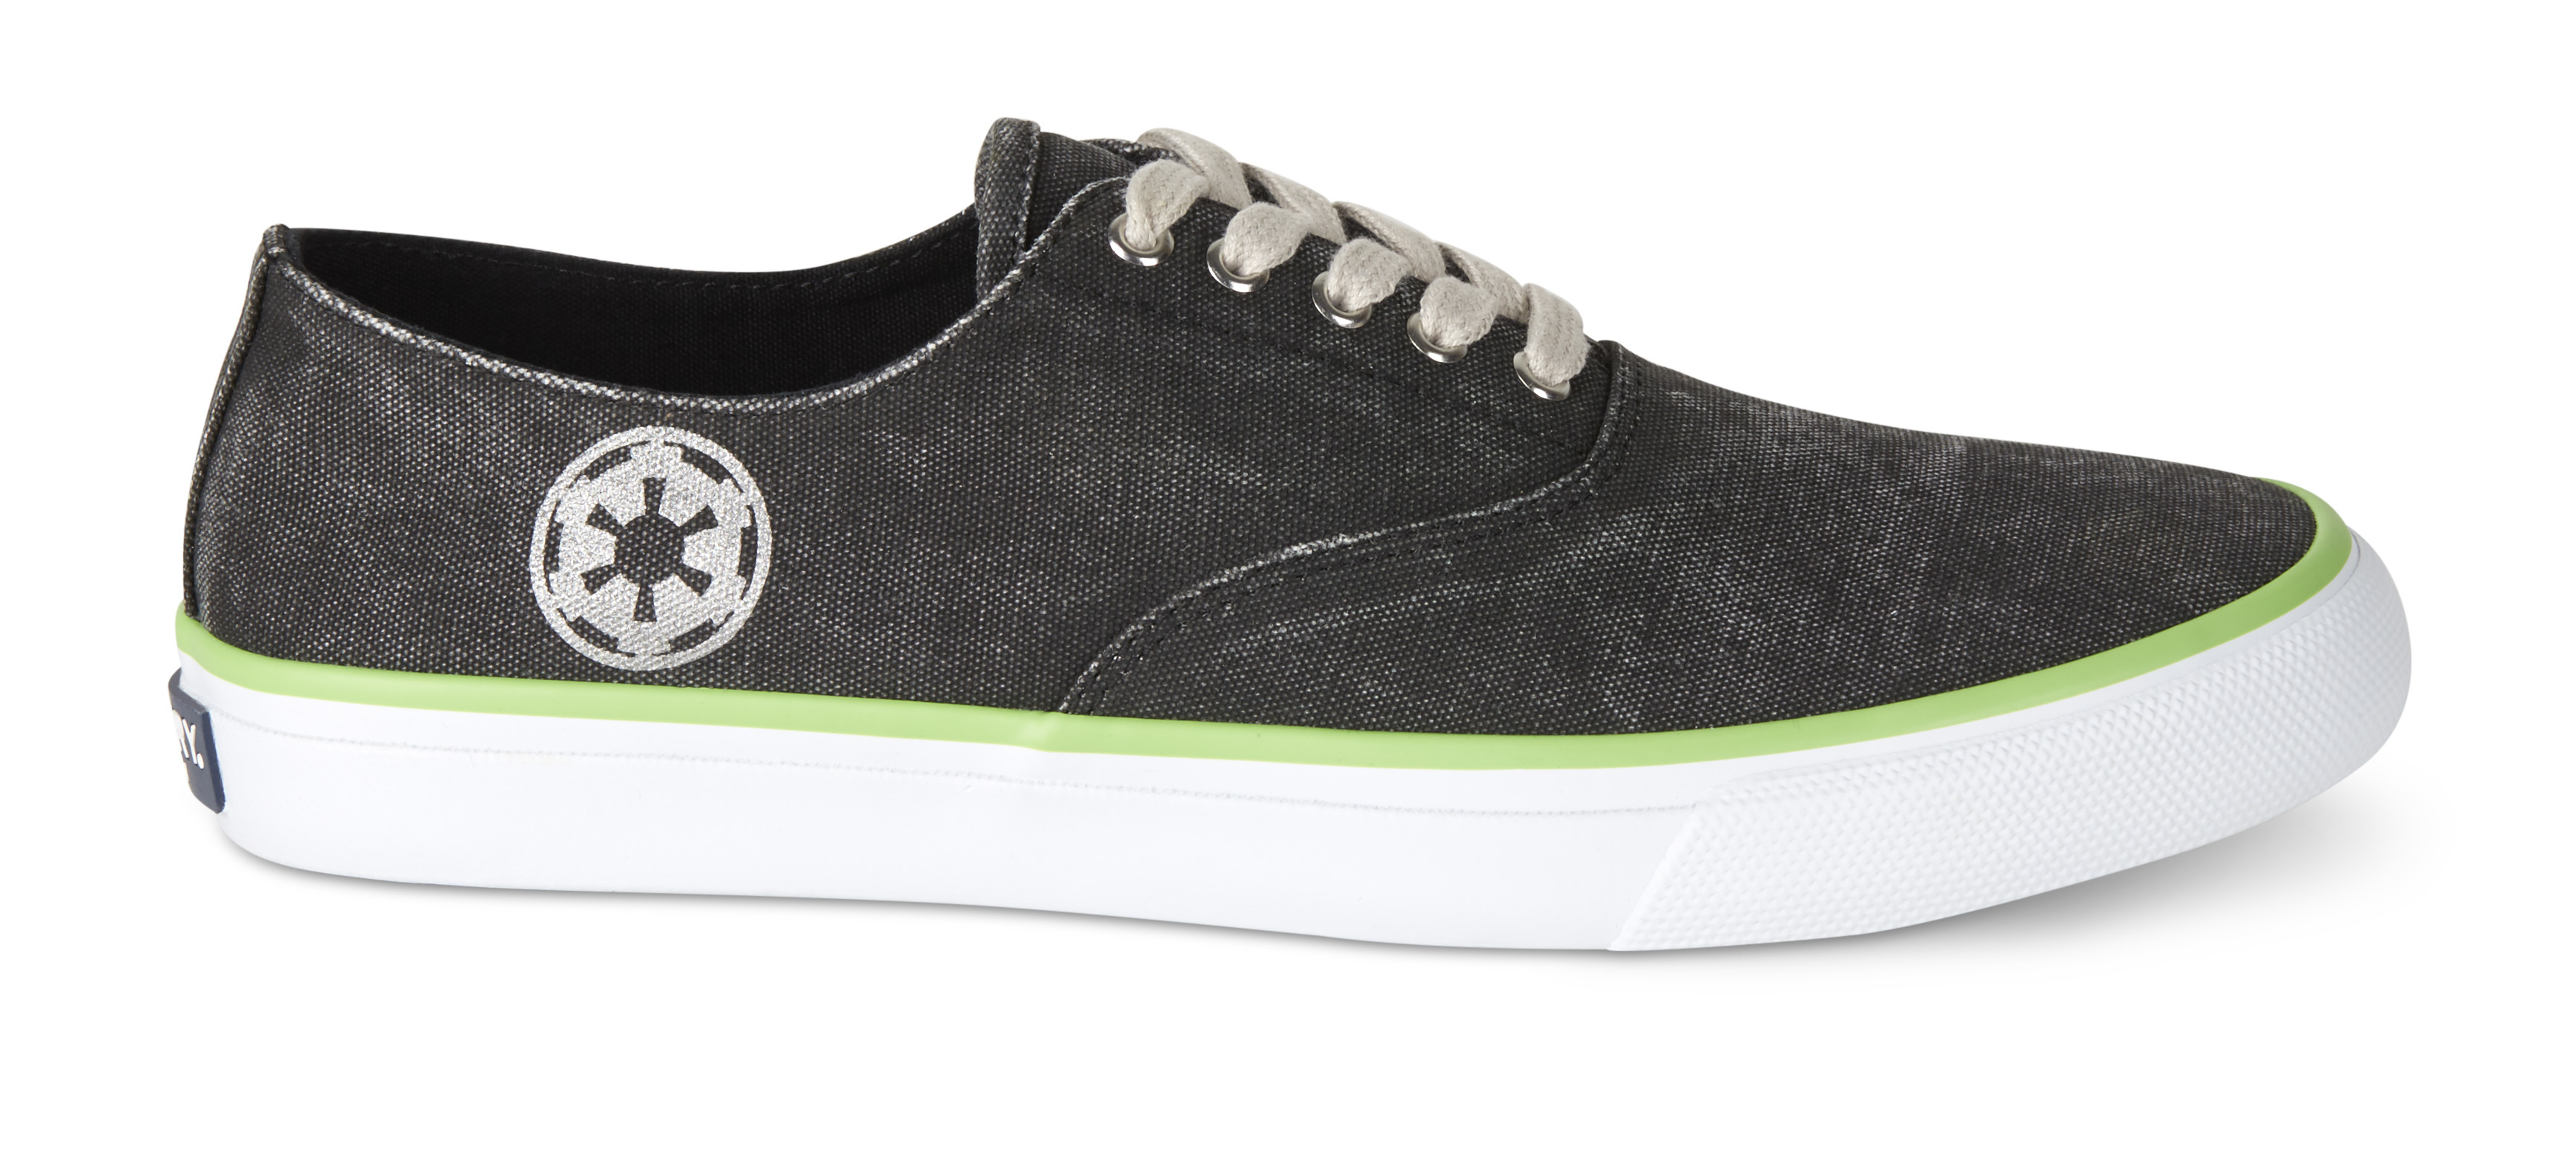 sperry star wars mens shoes